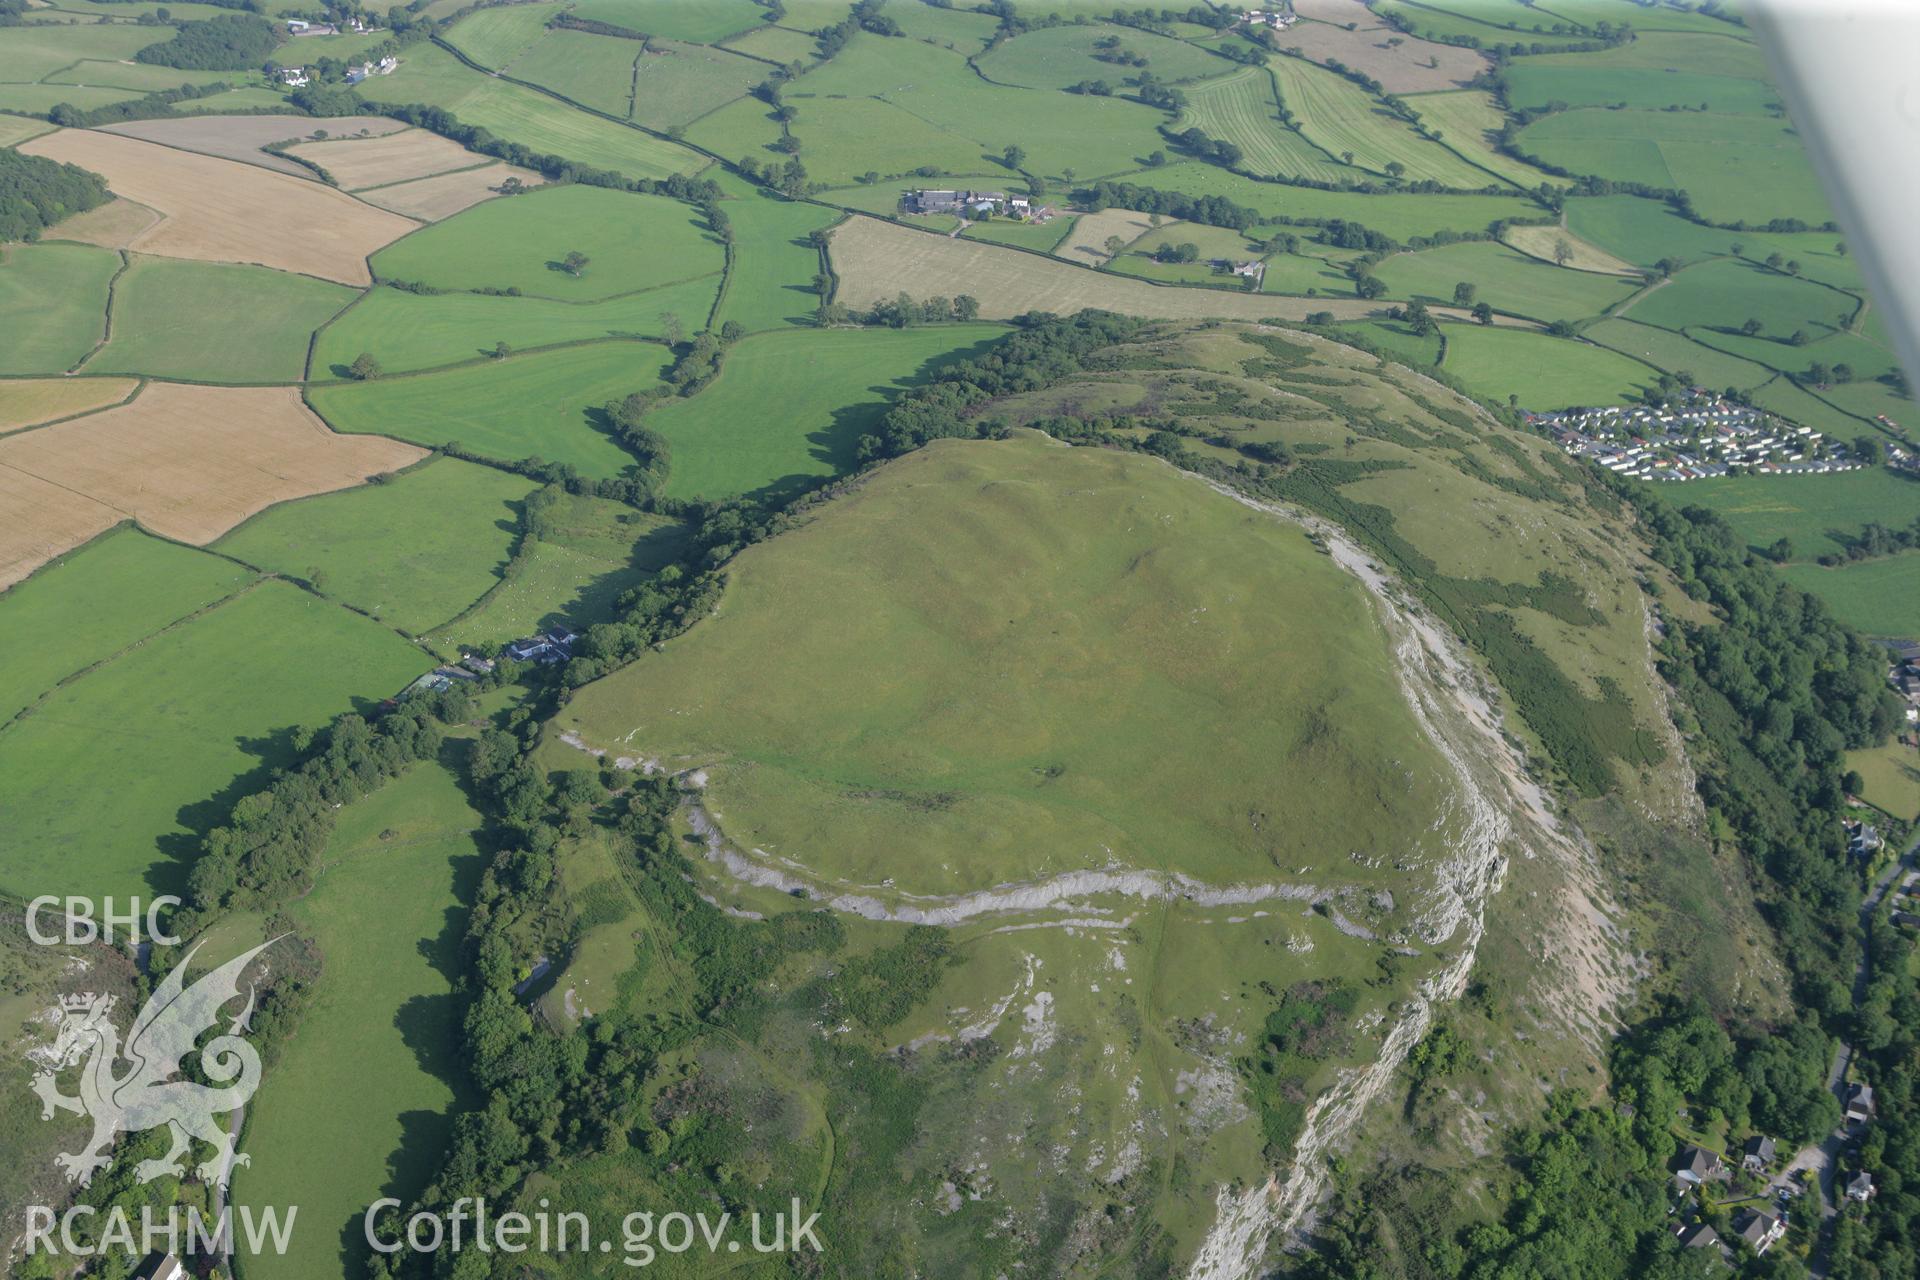 RCAHMW colour oblique photograph of Pen-y-Corddyn Mawr. Taken by Toby Driver and Oliver Davies on 27/07/2011.